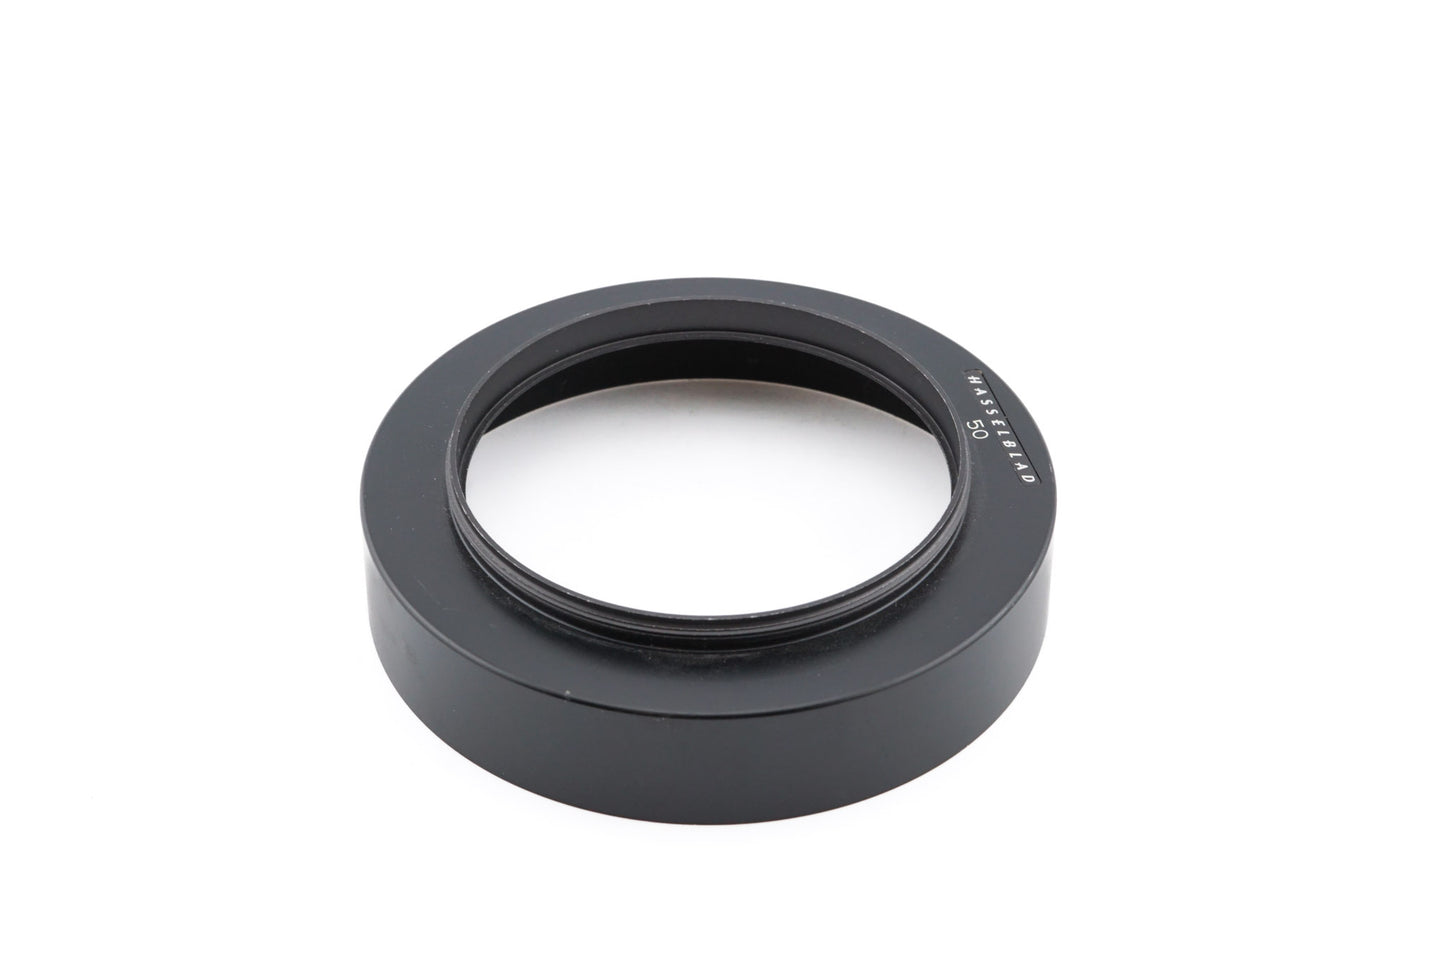 Hasselblad Lens Shade 50 (40274) - Accessory